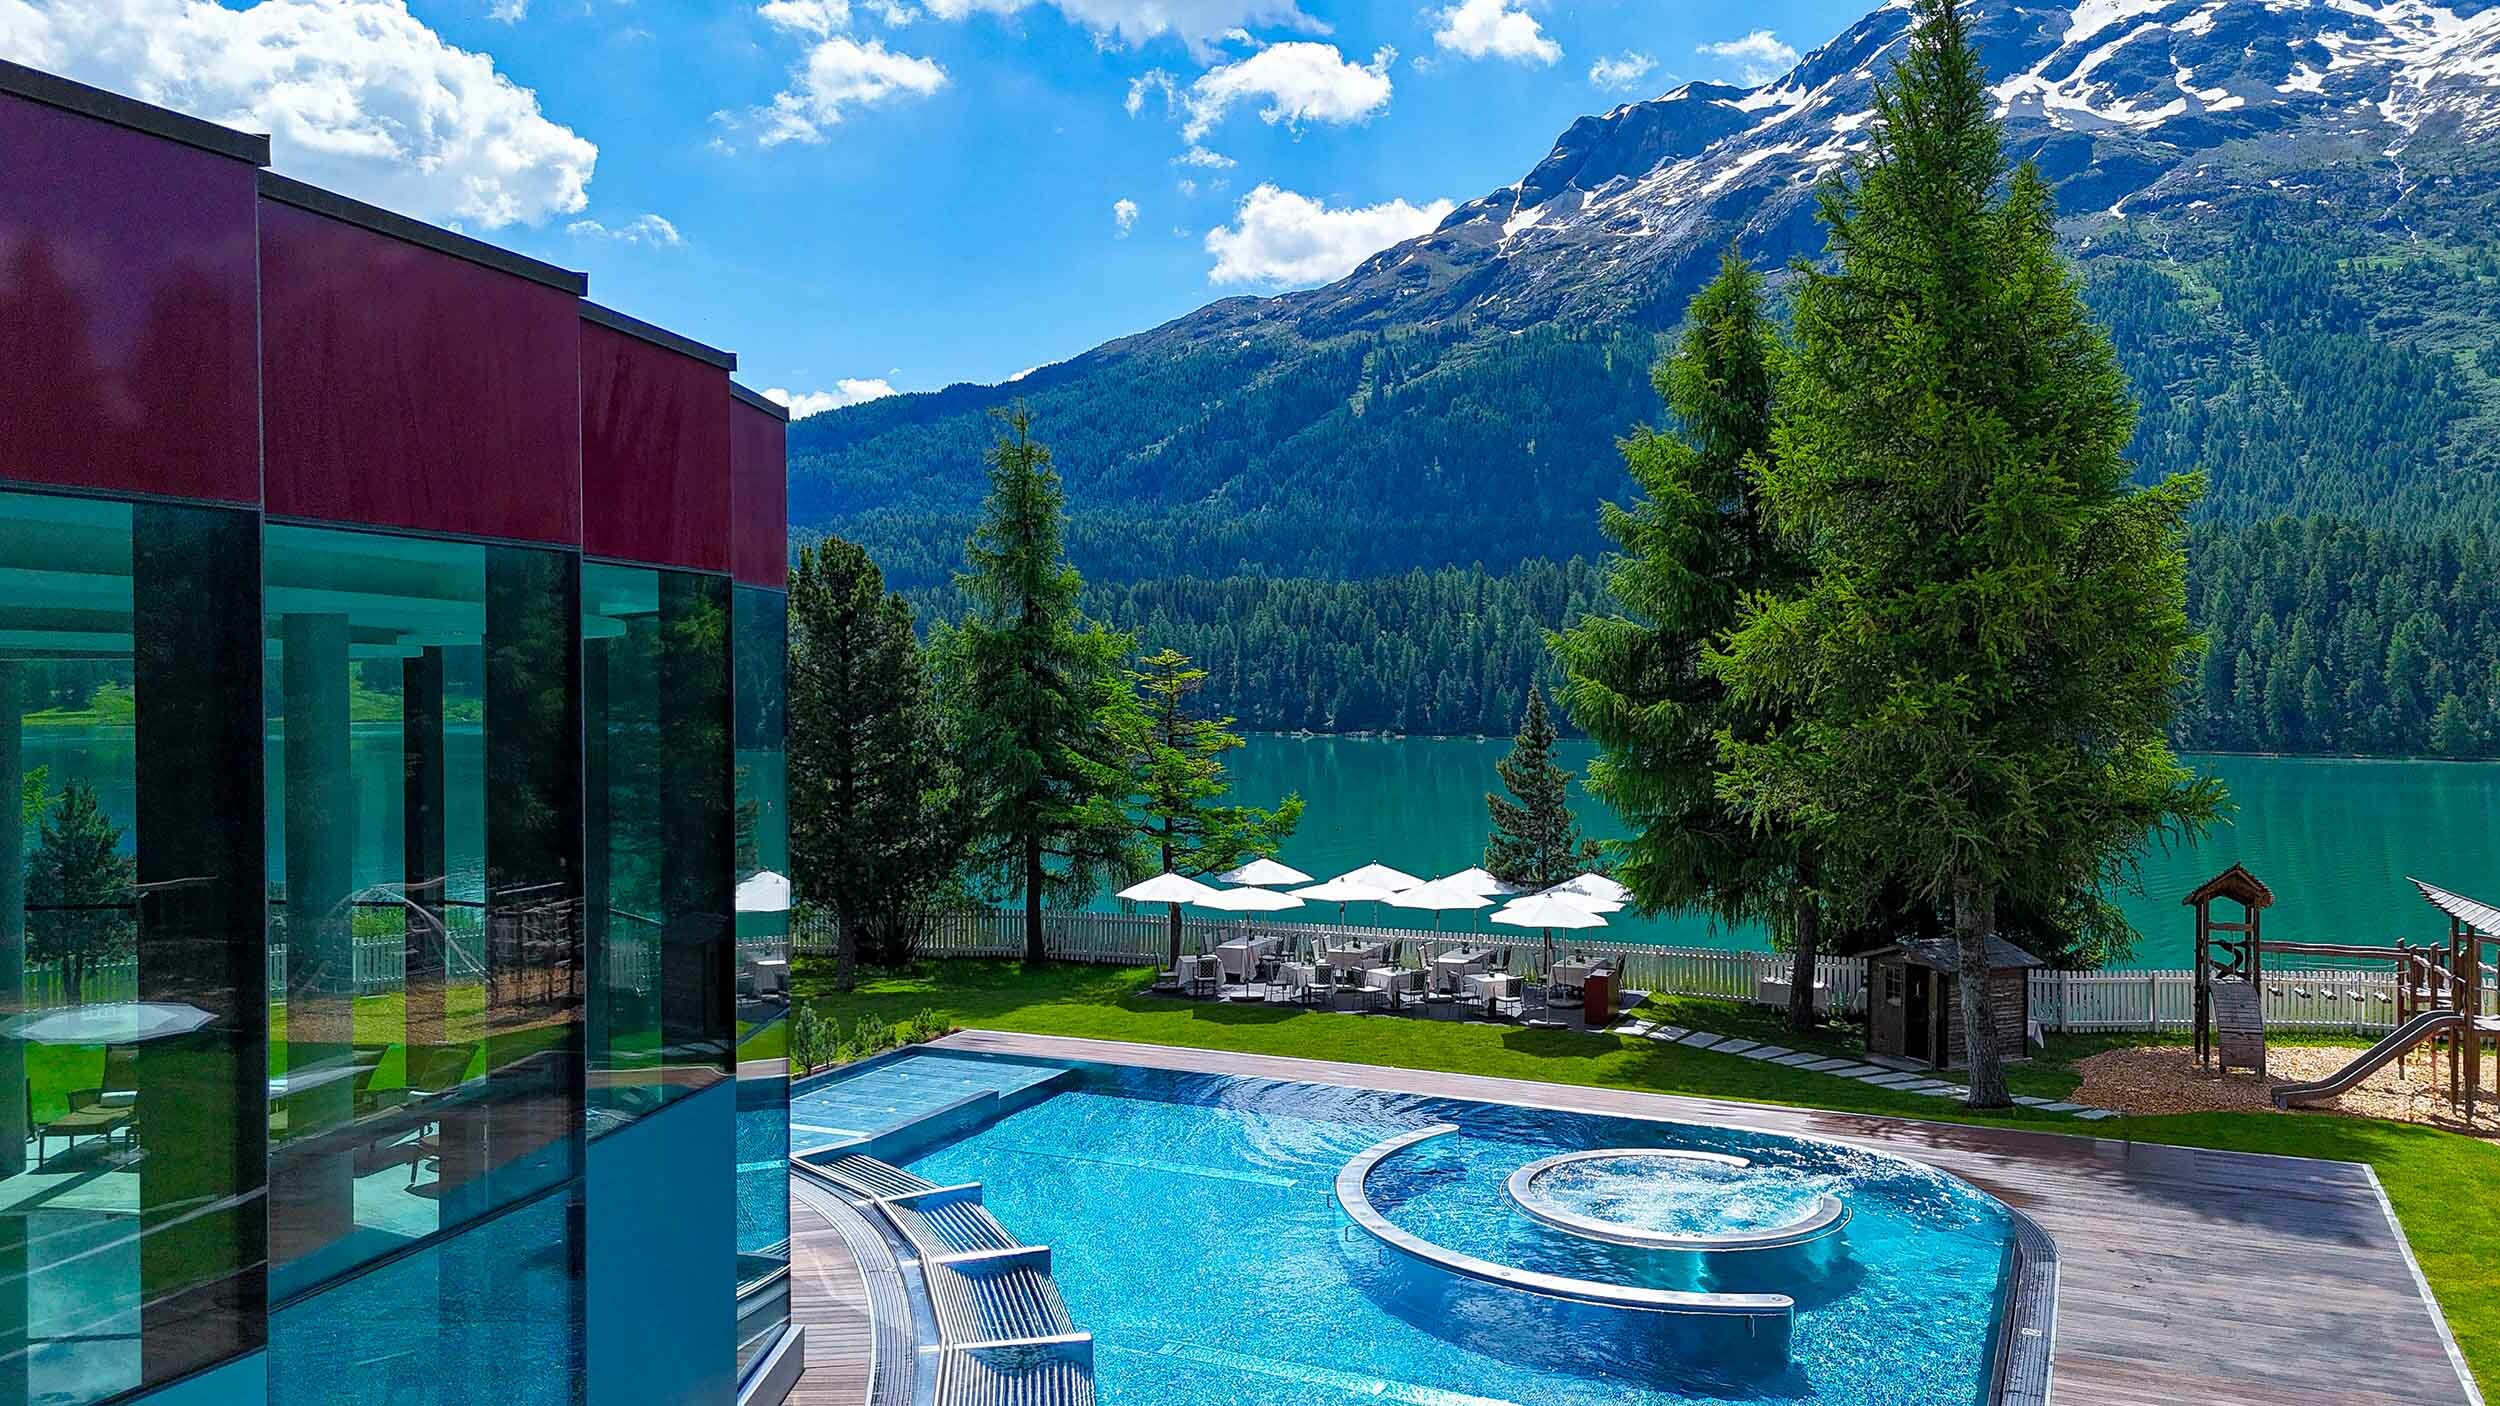 Swimming pool overlooking lake, forsests and mountains